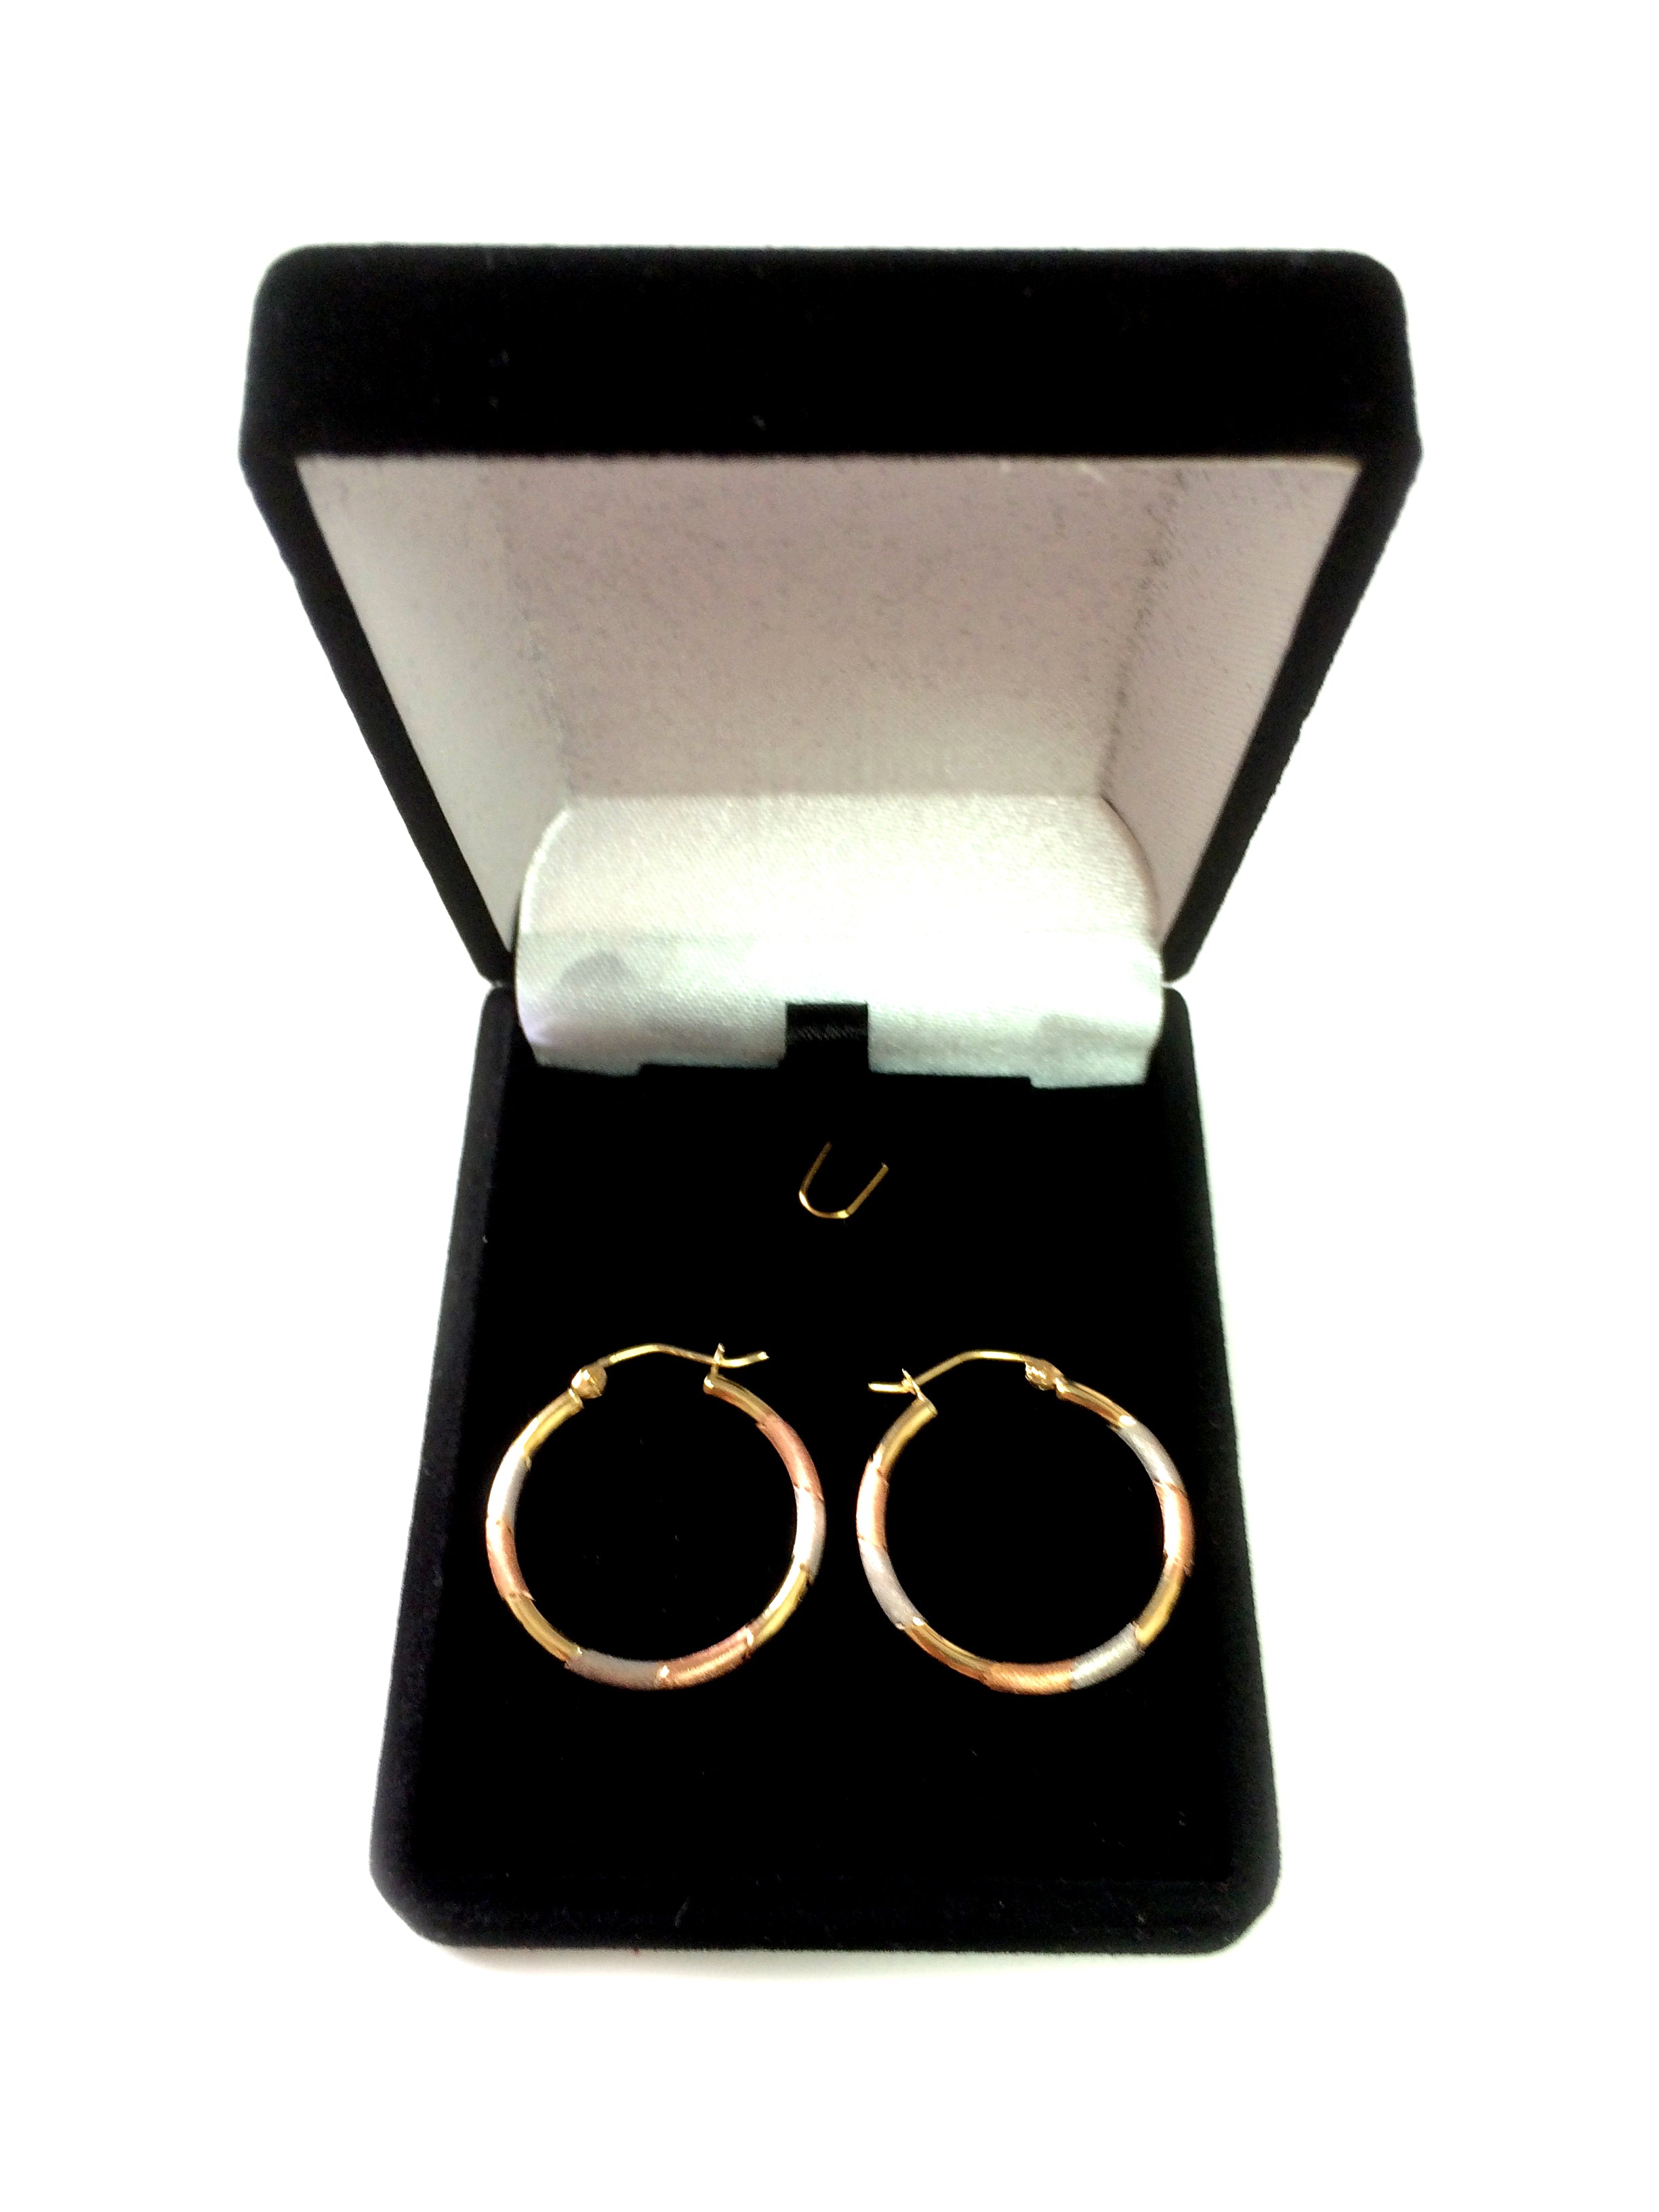 10k Tricolor White Yellow And Rose Gold Diamond Cut Round Hoop Earrings, Diameter 20mm fine designer jewelry for men and women